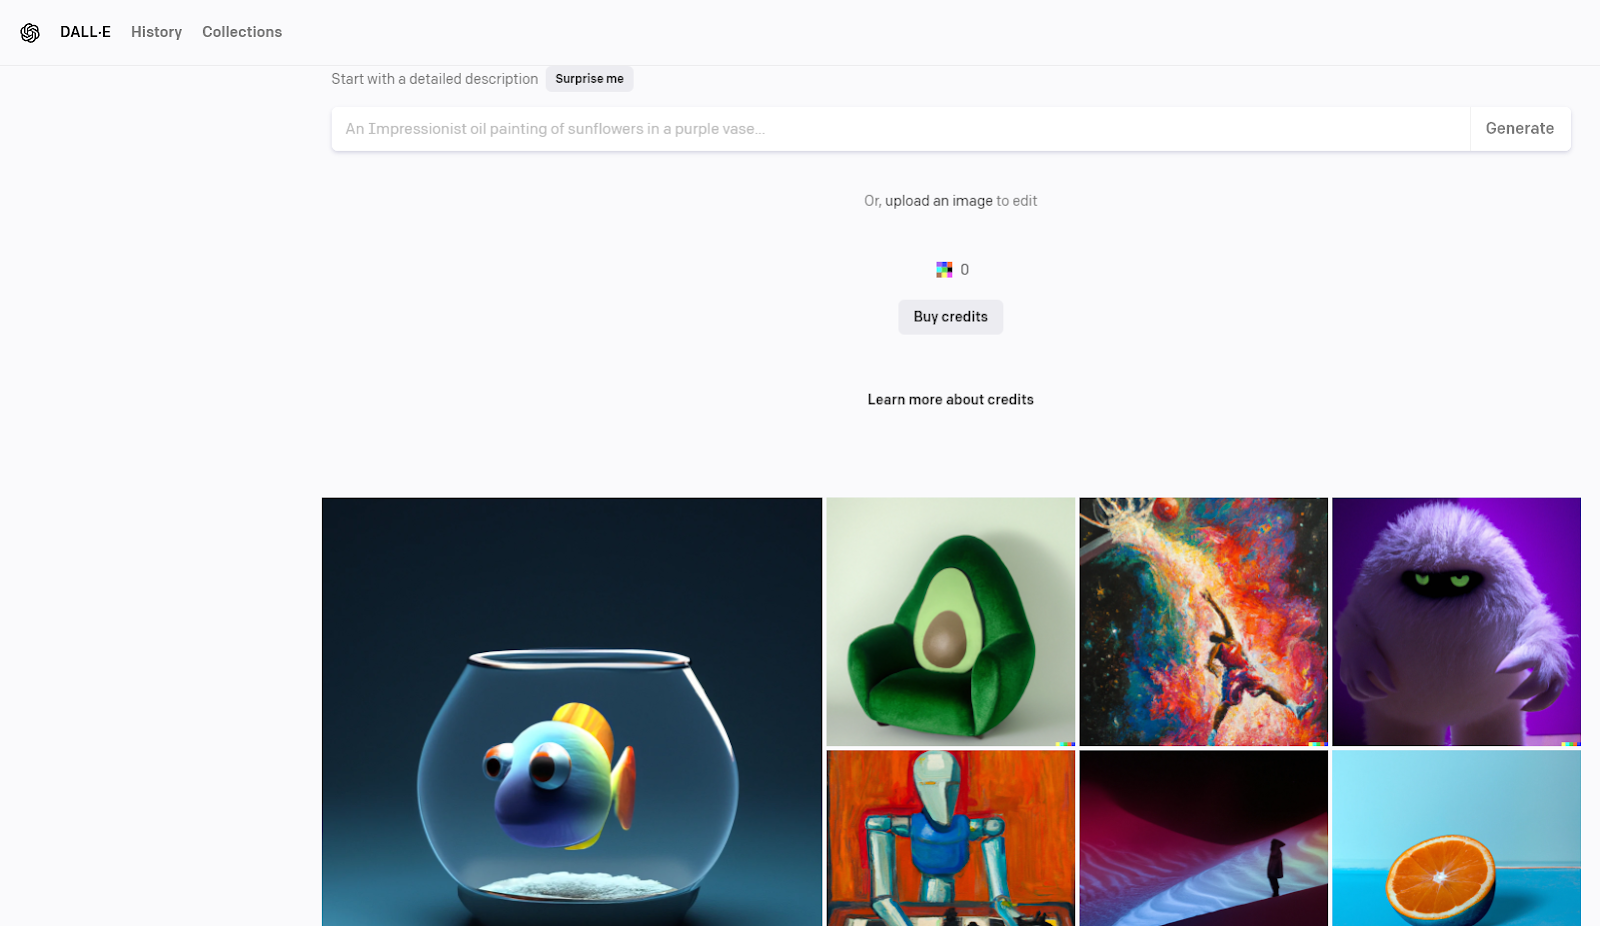 Screenshot of the AI blogging tool DALL-E, showing the prompt screen plus a range of previously-generated images in different styles.